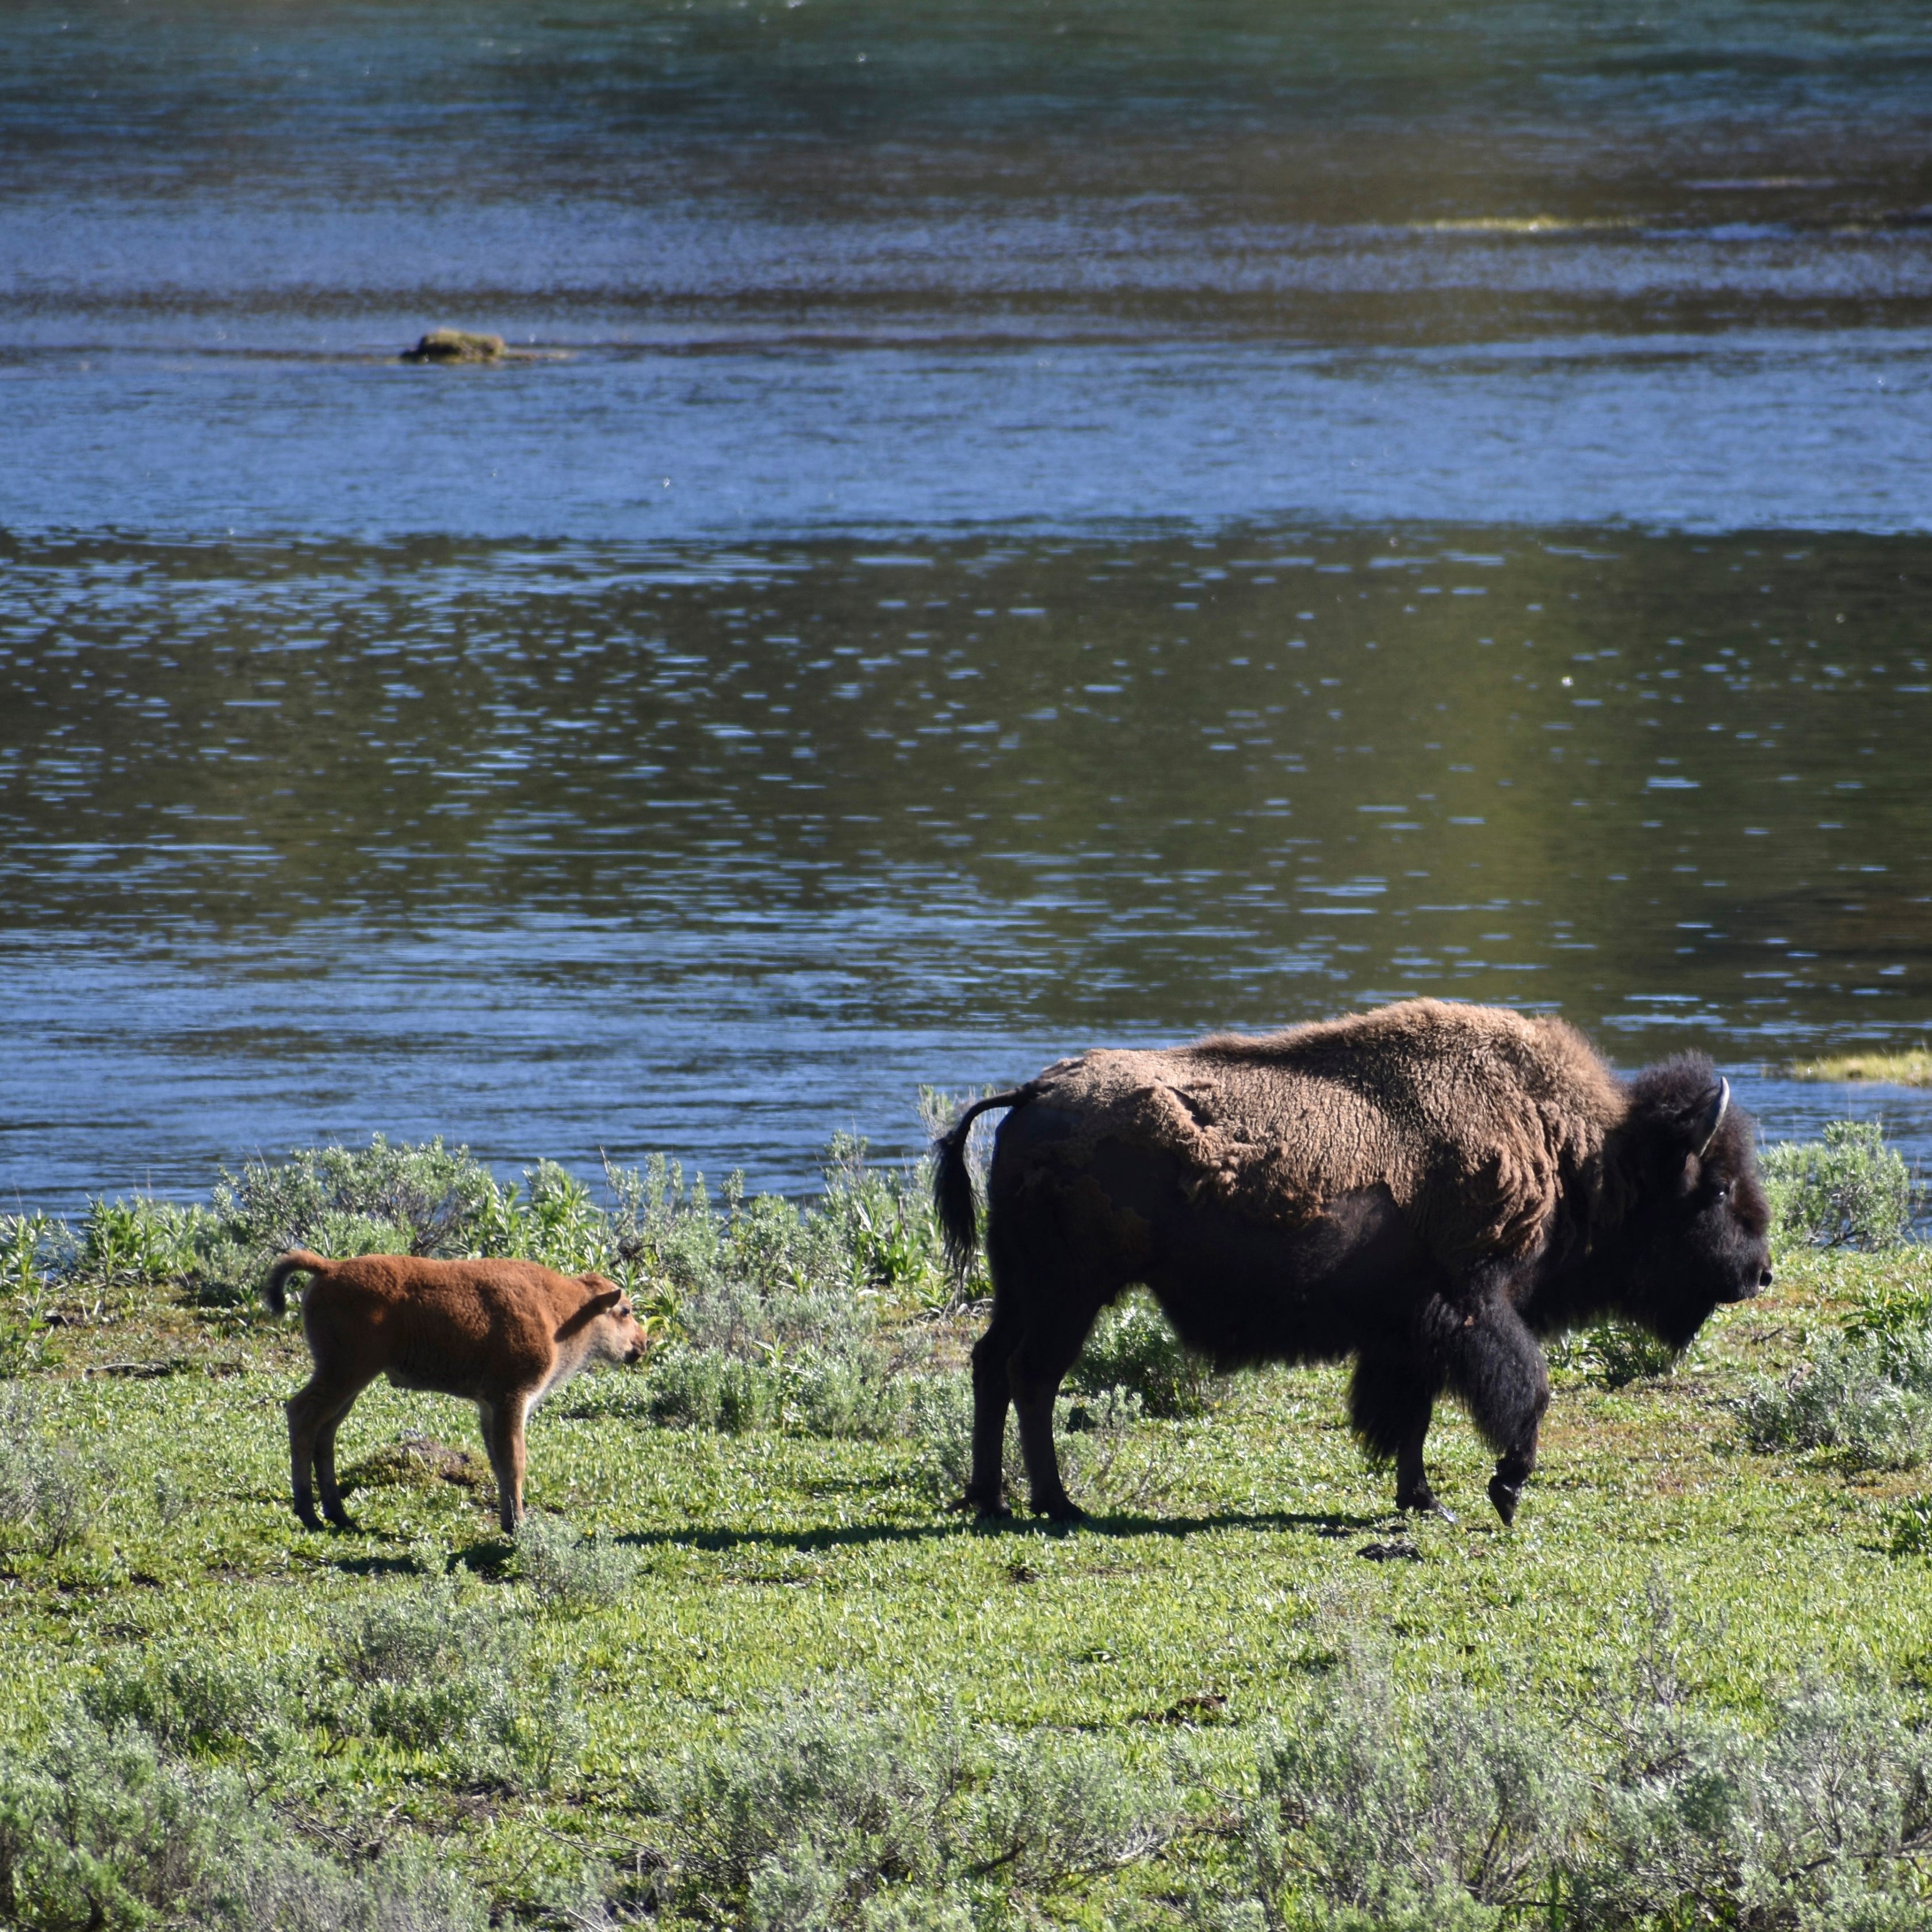 A female bison and calf are seen near the Yellowstone River in Wyoming's Hayden Valley in Yellowstone National Park.